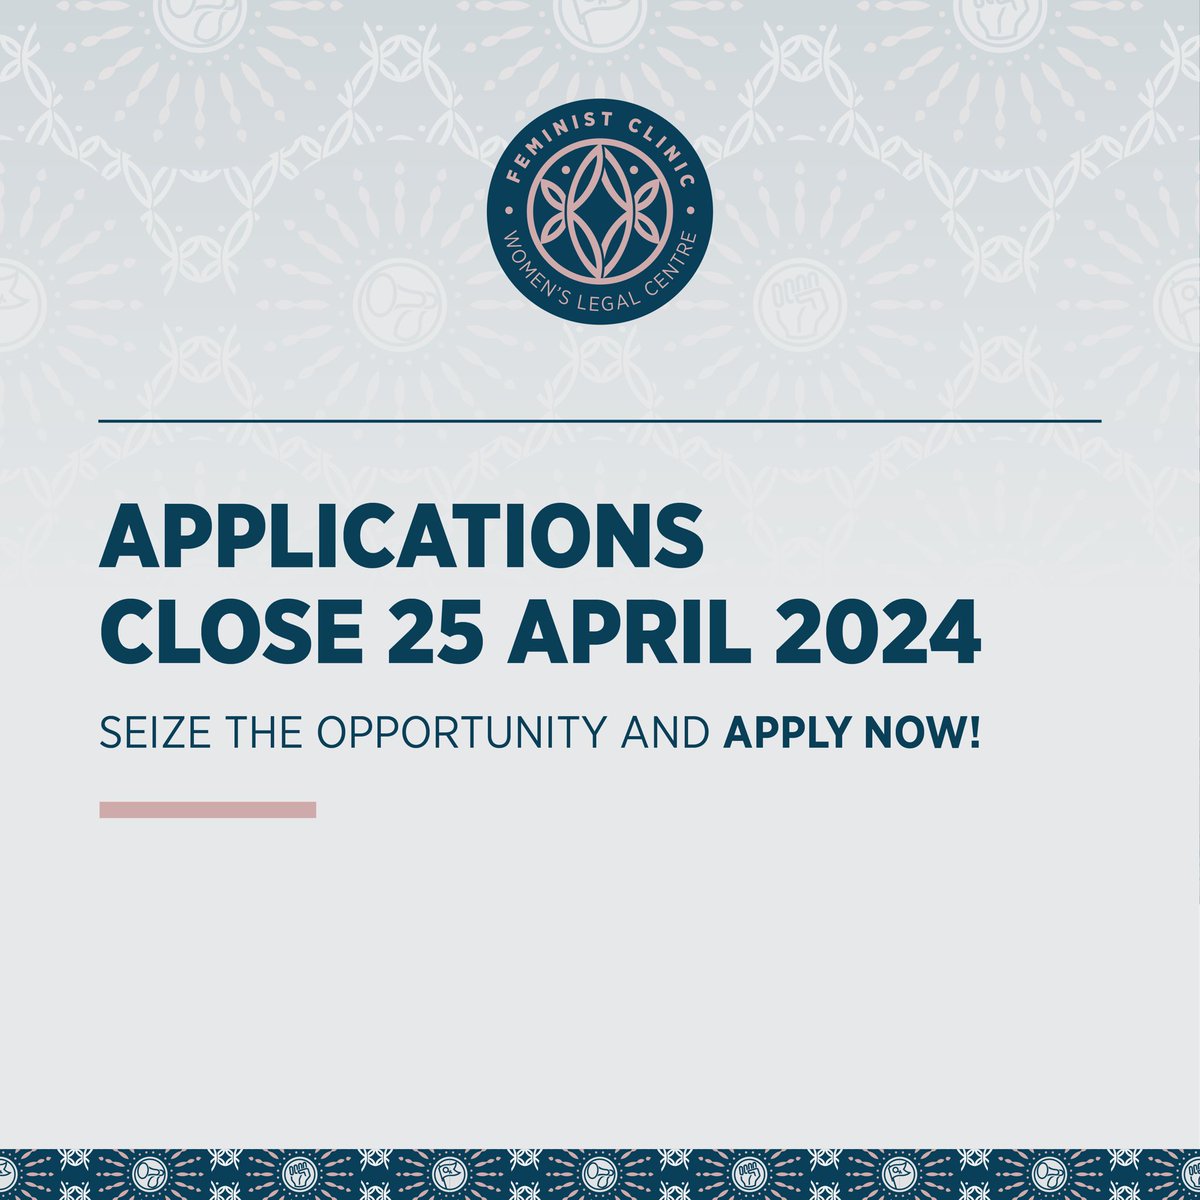 Only 15 spots available for our 2024 Feminist Clinic! Apply now and secure your spot for this transformative experience in Midrand, Johannesburg. Applications close April 25th, 2024. #FeministClinic #FeministJurisprudence #LegalTransformation